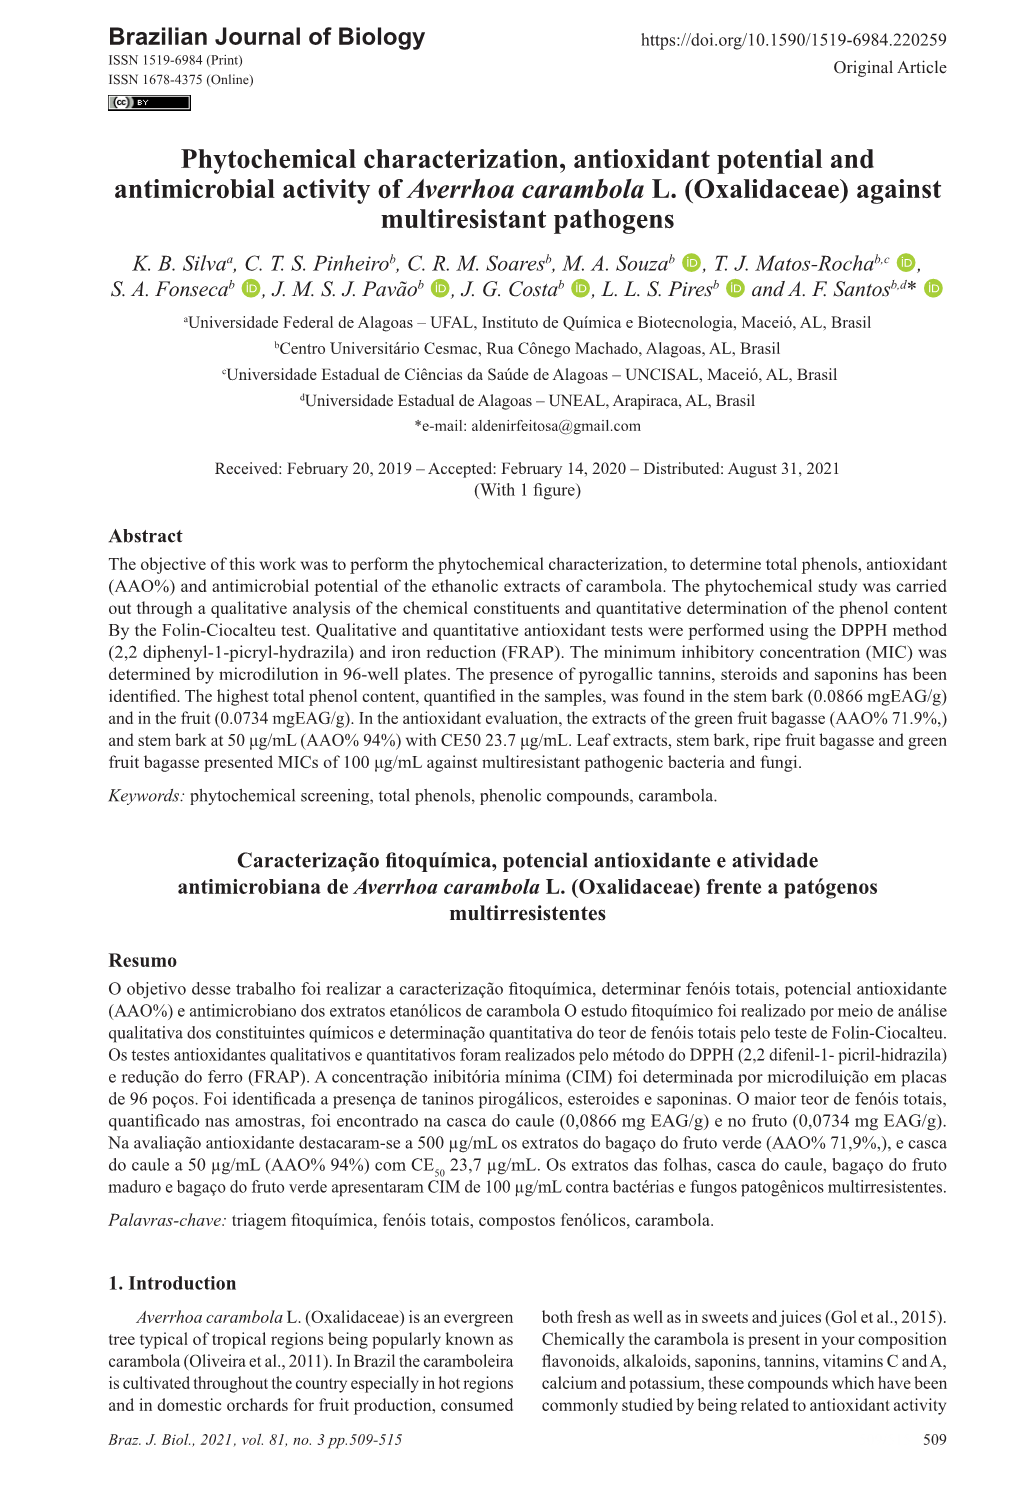 Phytochemical Characterization, Antioxidant Potential and Antimicrobial Activity of Averrhoa Carambola L